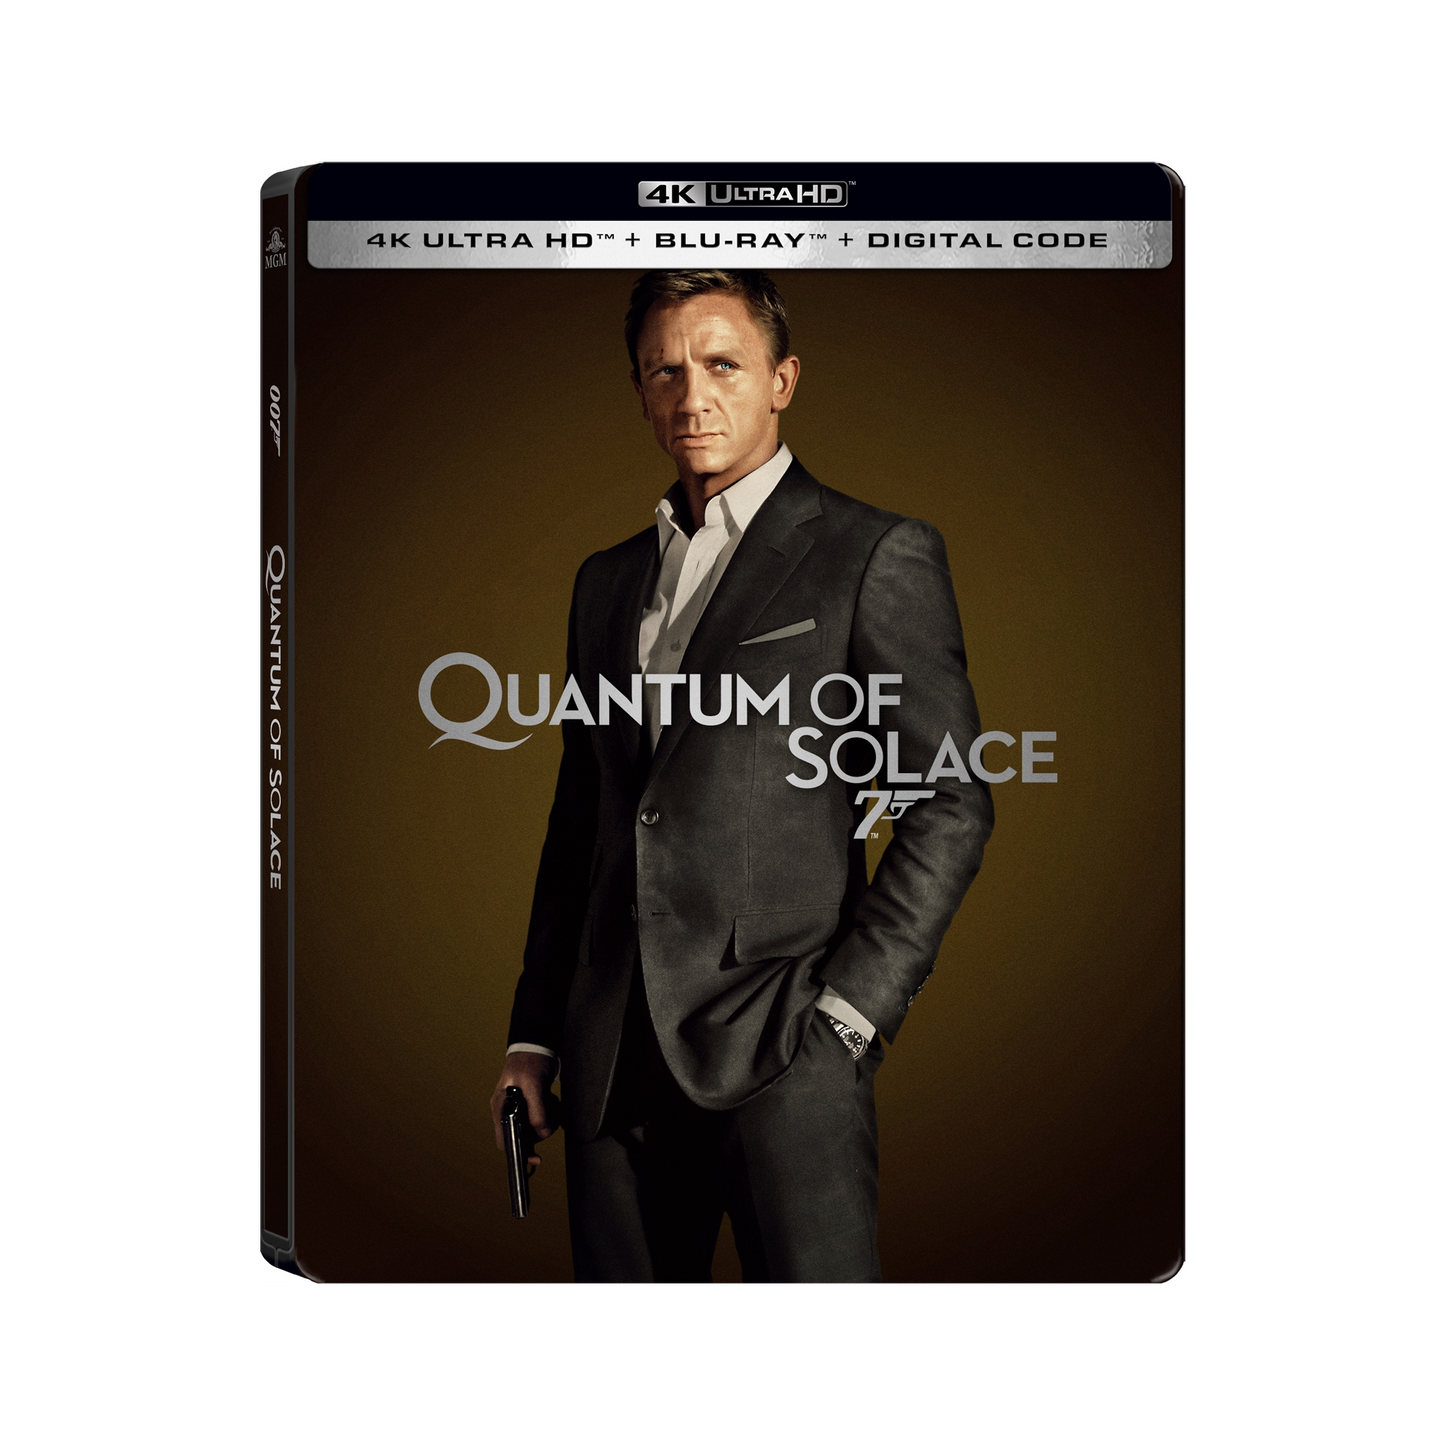 Quantum of Solace 4K Blu-ray 007 - Best Buy Exclusive Limited Edition SteelBook